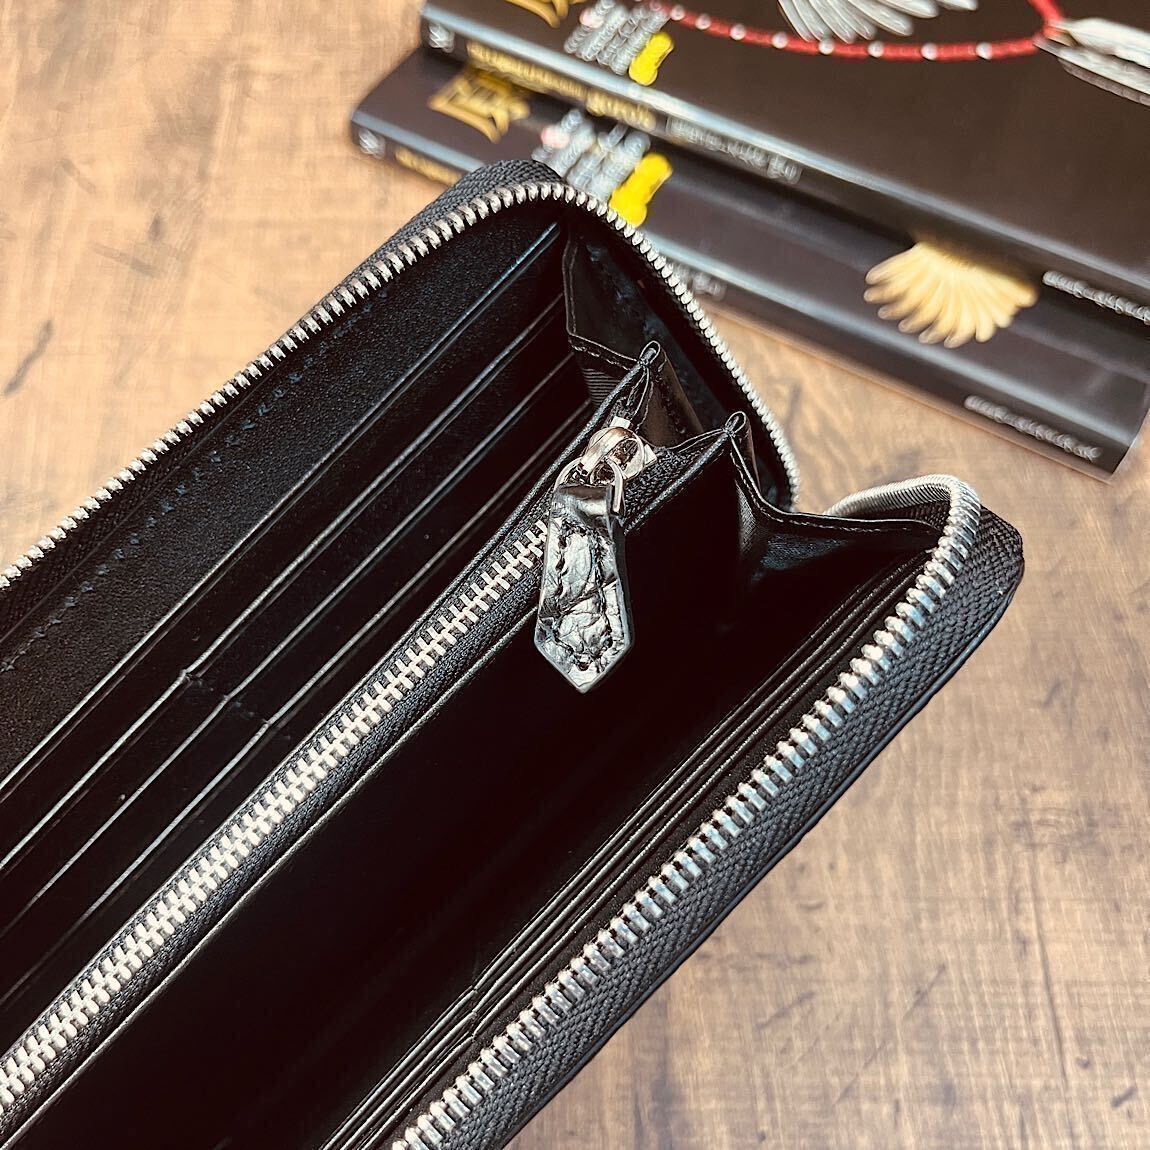  the truth thing photographing one sheets leather crocodile long wallet men's round fastener purse new goods free shipping 1 jpy wani. eyes ground dyeing men's purse leather purse black 